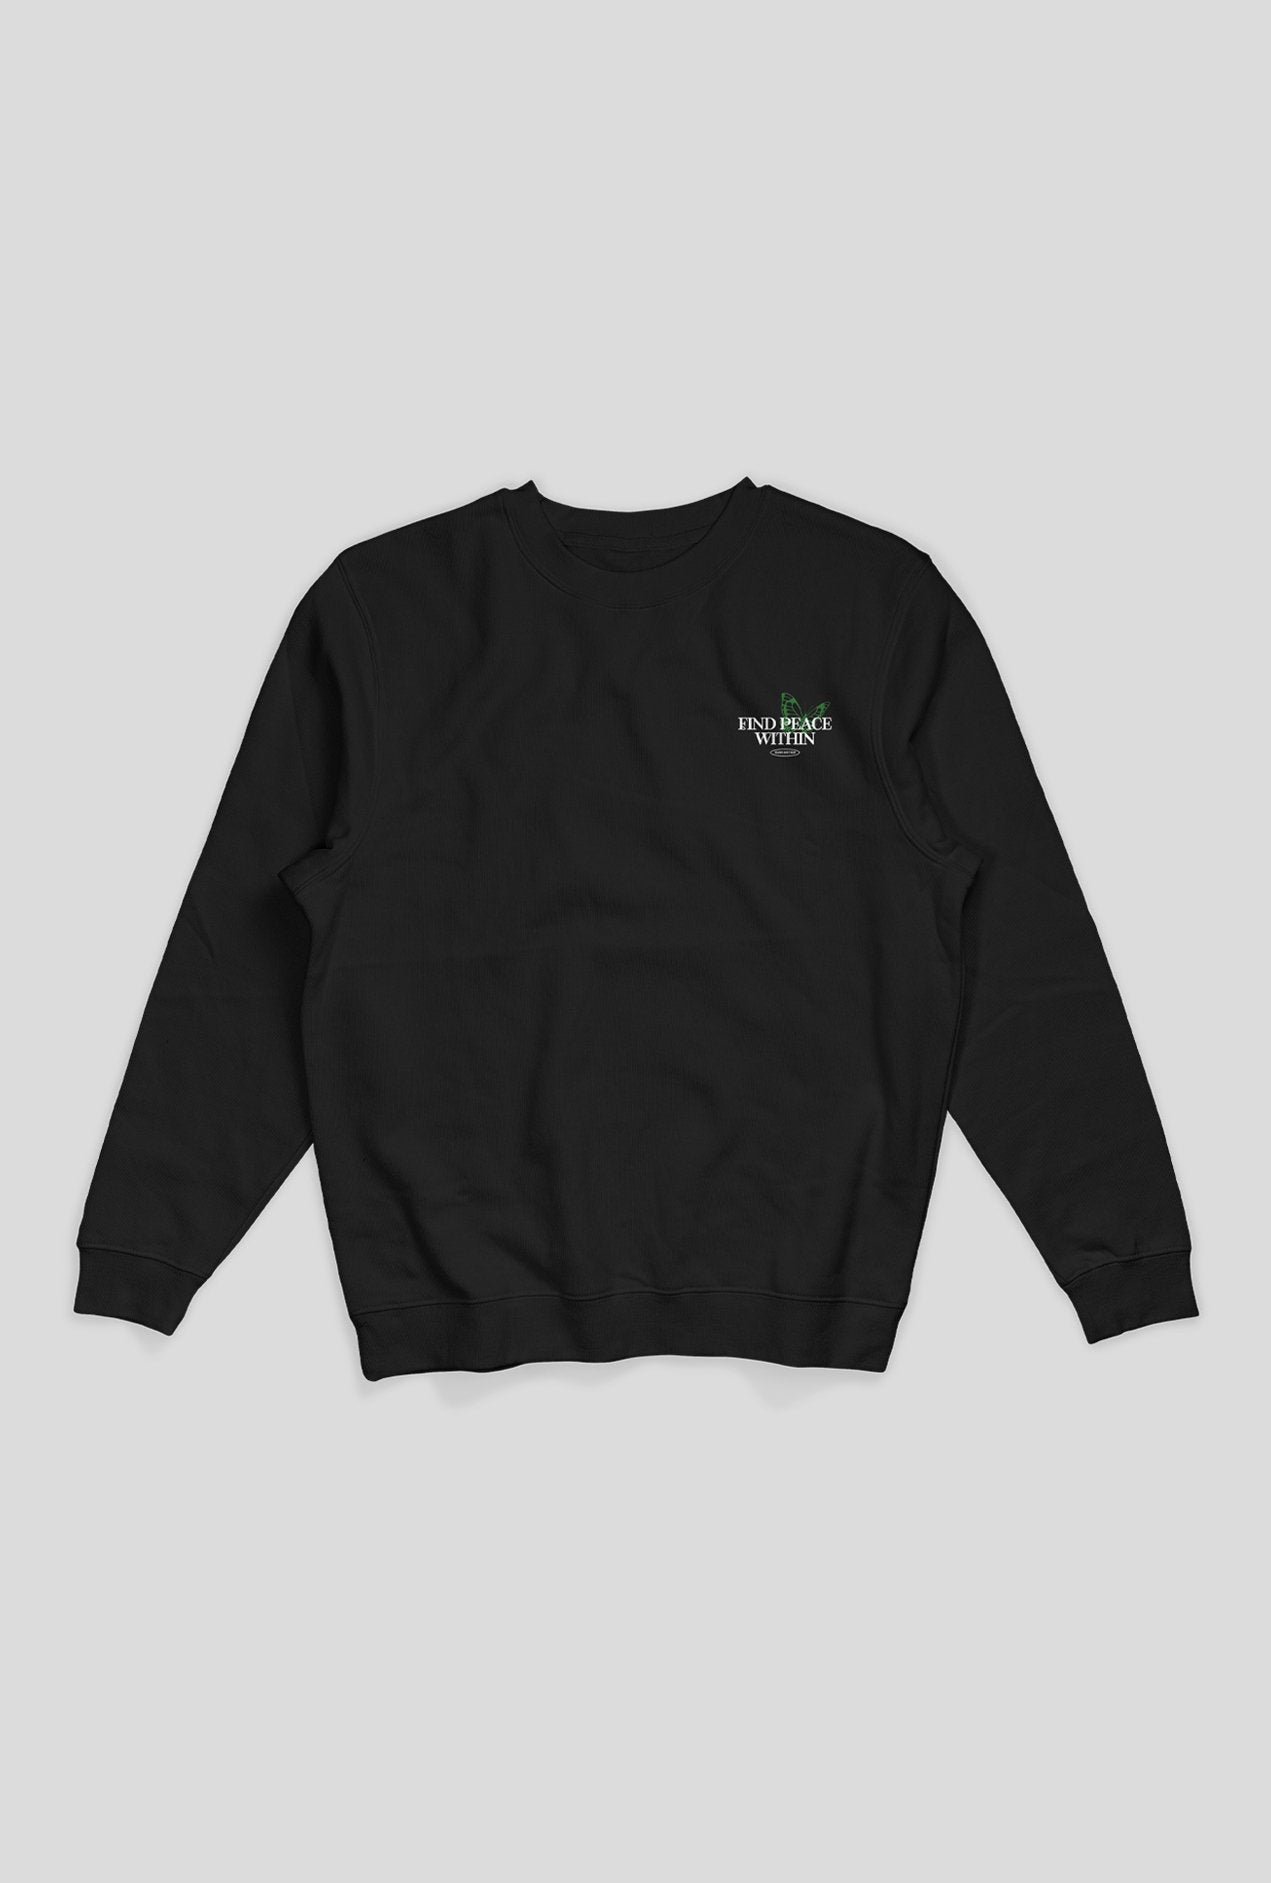 Find Peace Within Sweatshirt - Black (PREORDER) - band2gether